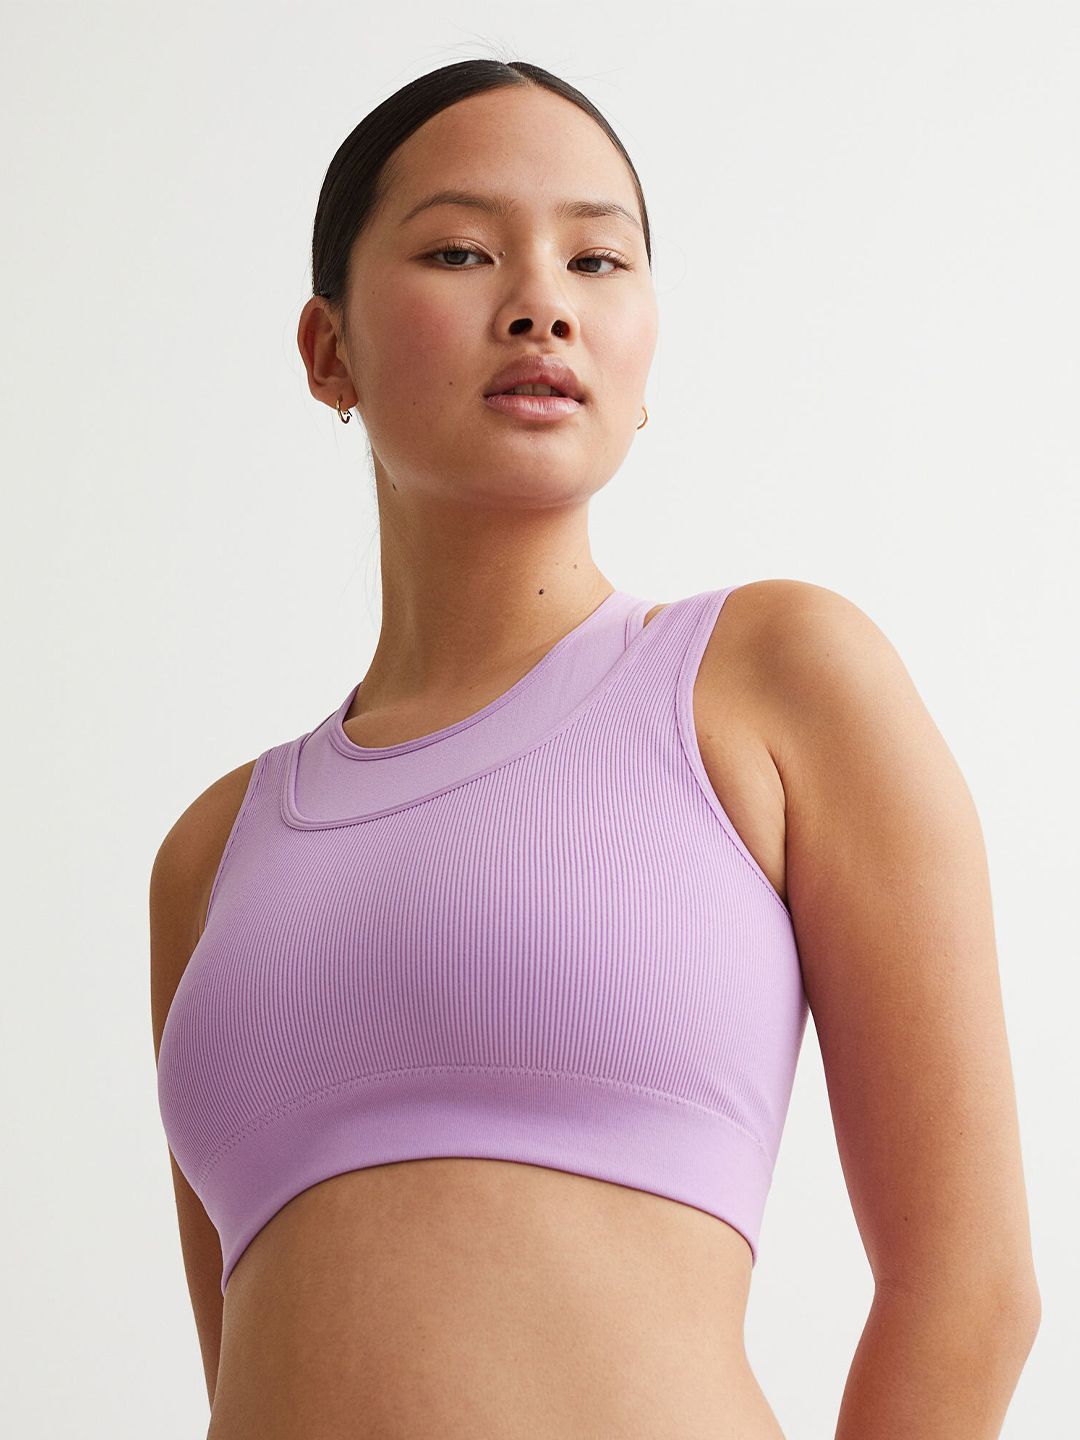 H&M Women Lavender Solid Seamless Light support Sports bra 1059204004 Price in India